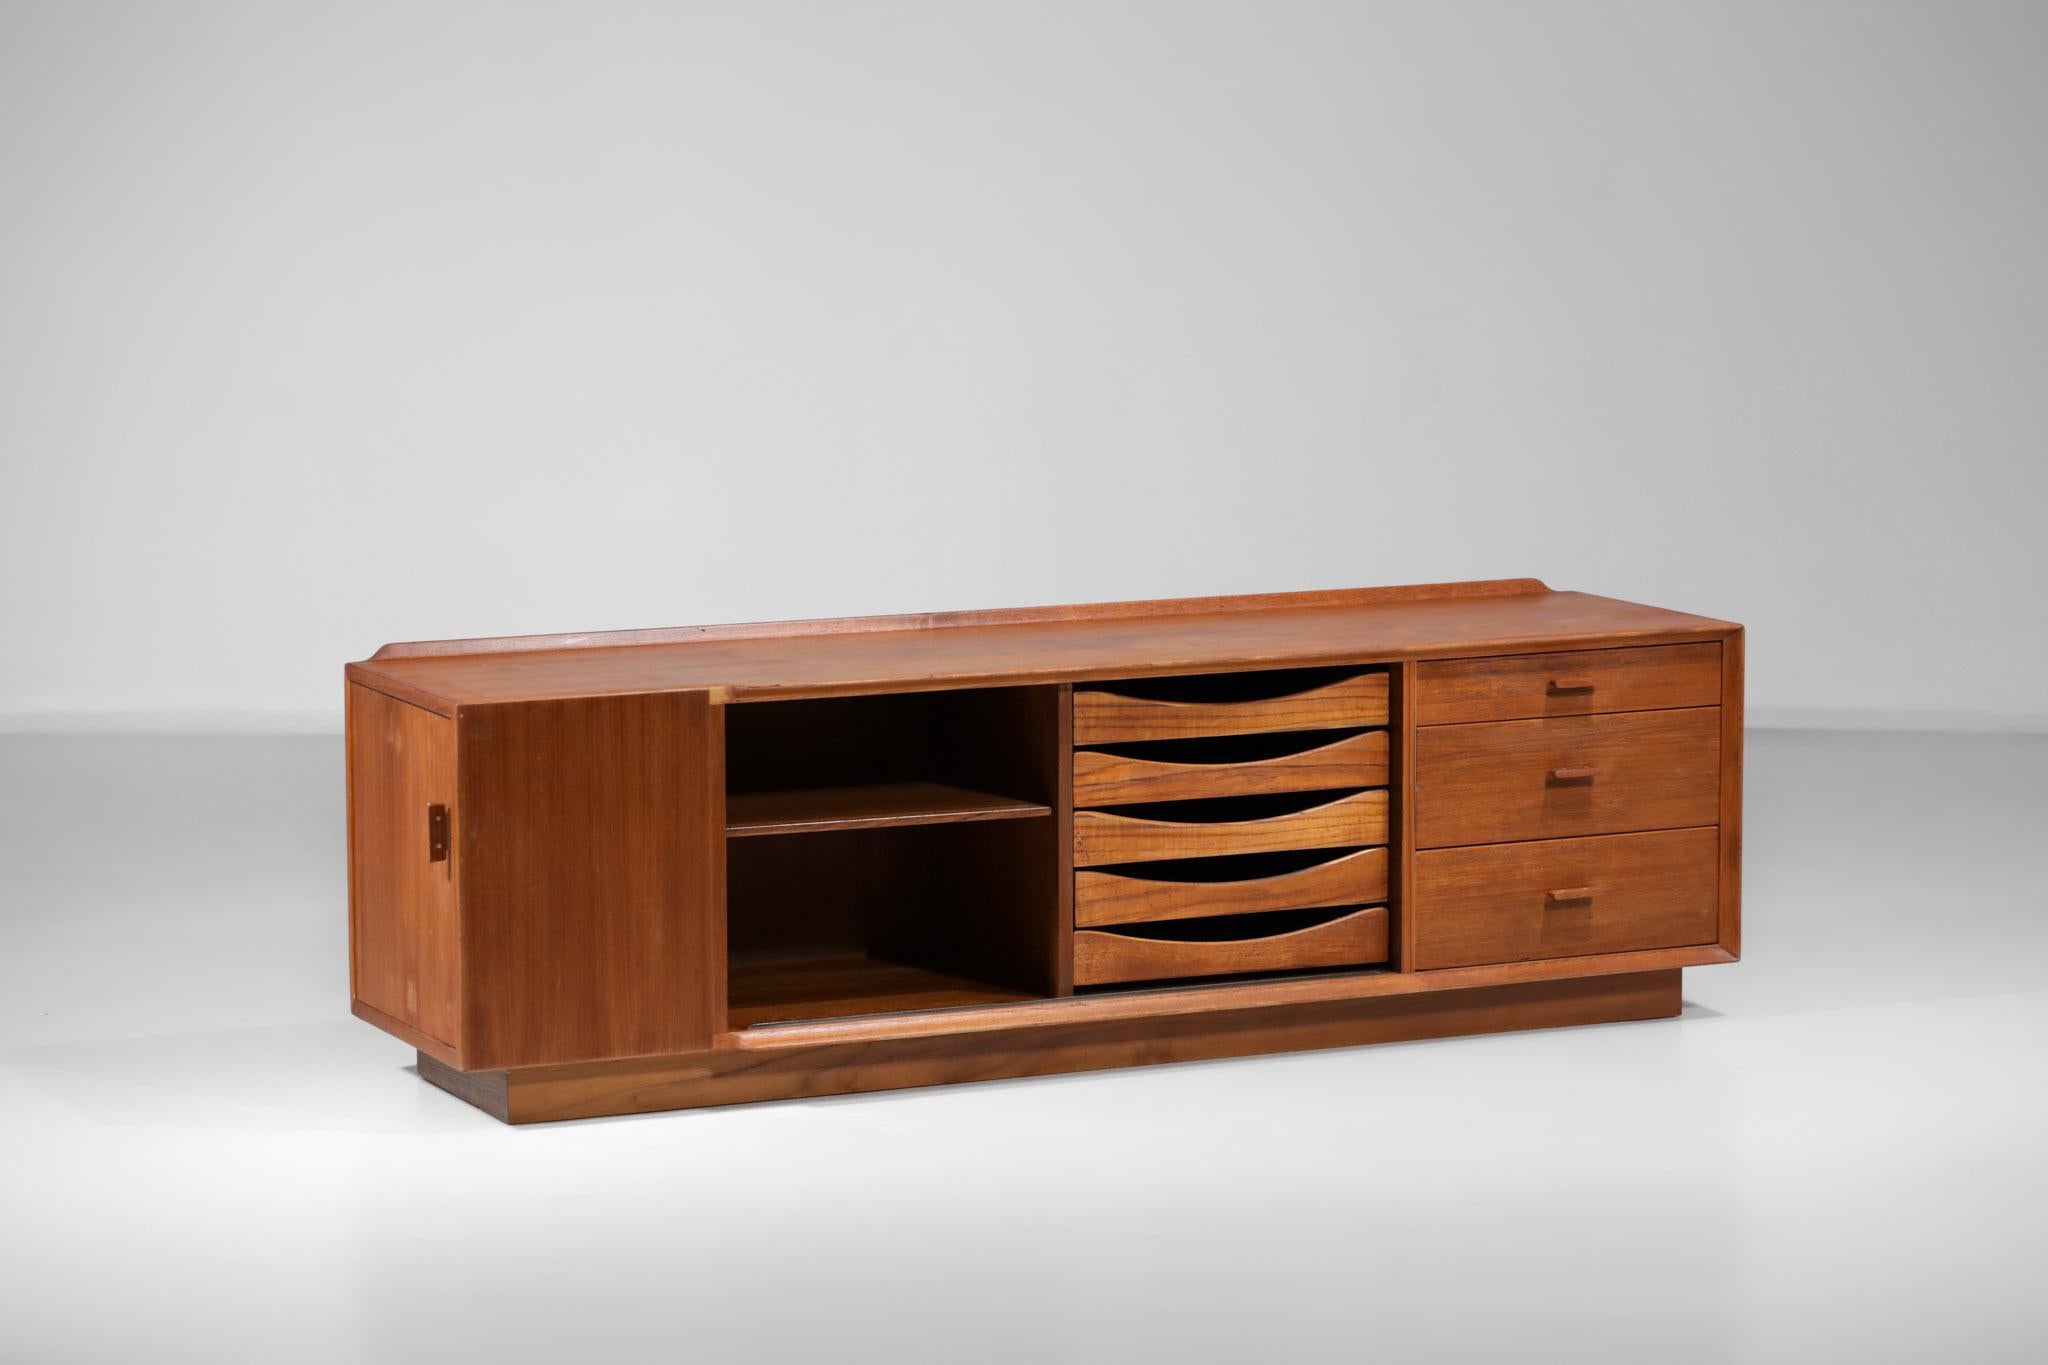 Sideboard from the 60's by designer Arne Vodder published by Sibast. Structure in solid teak and veneer. The front consists of five drawers, a sliding door opening from the adjustable shelves, three drawers of different sizes in solid teak and on